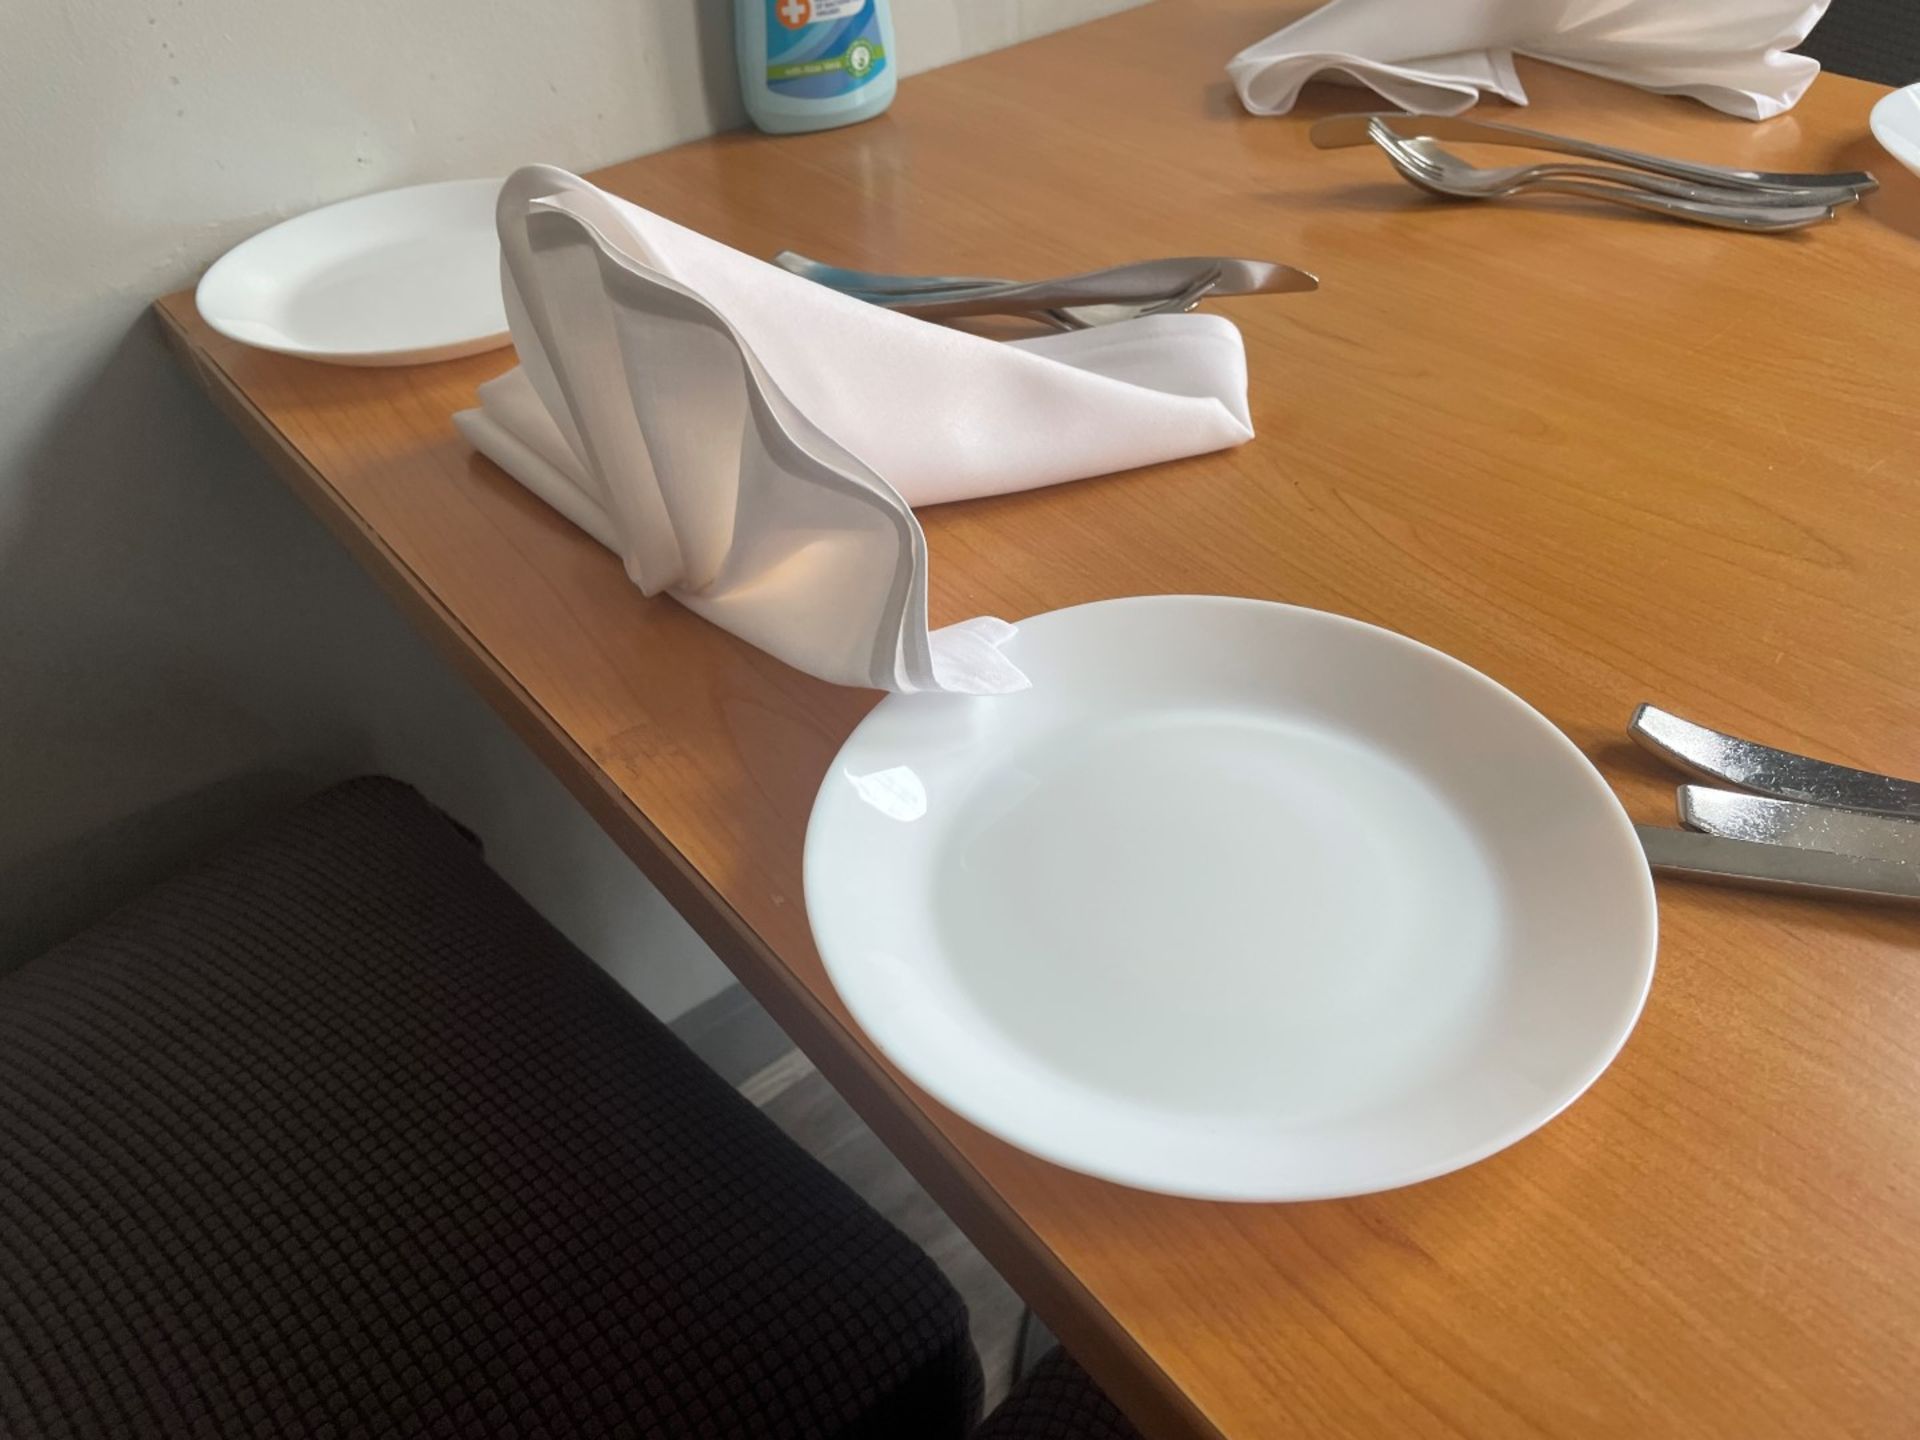 50 x White Dinner Plates, 50 x Fabric Napkins and 150 x Pieces of Contemporary Cutlery - Ref: JMR000 - Image 4 of 5